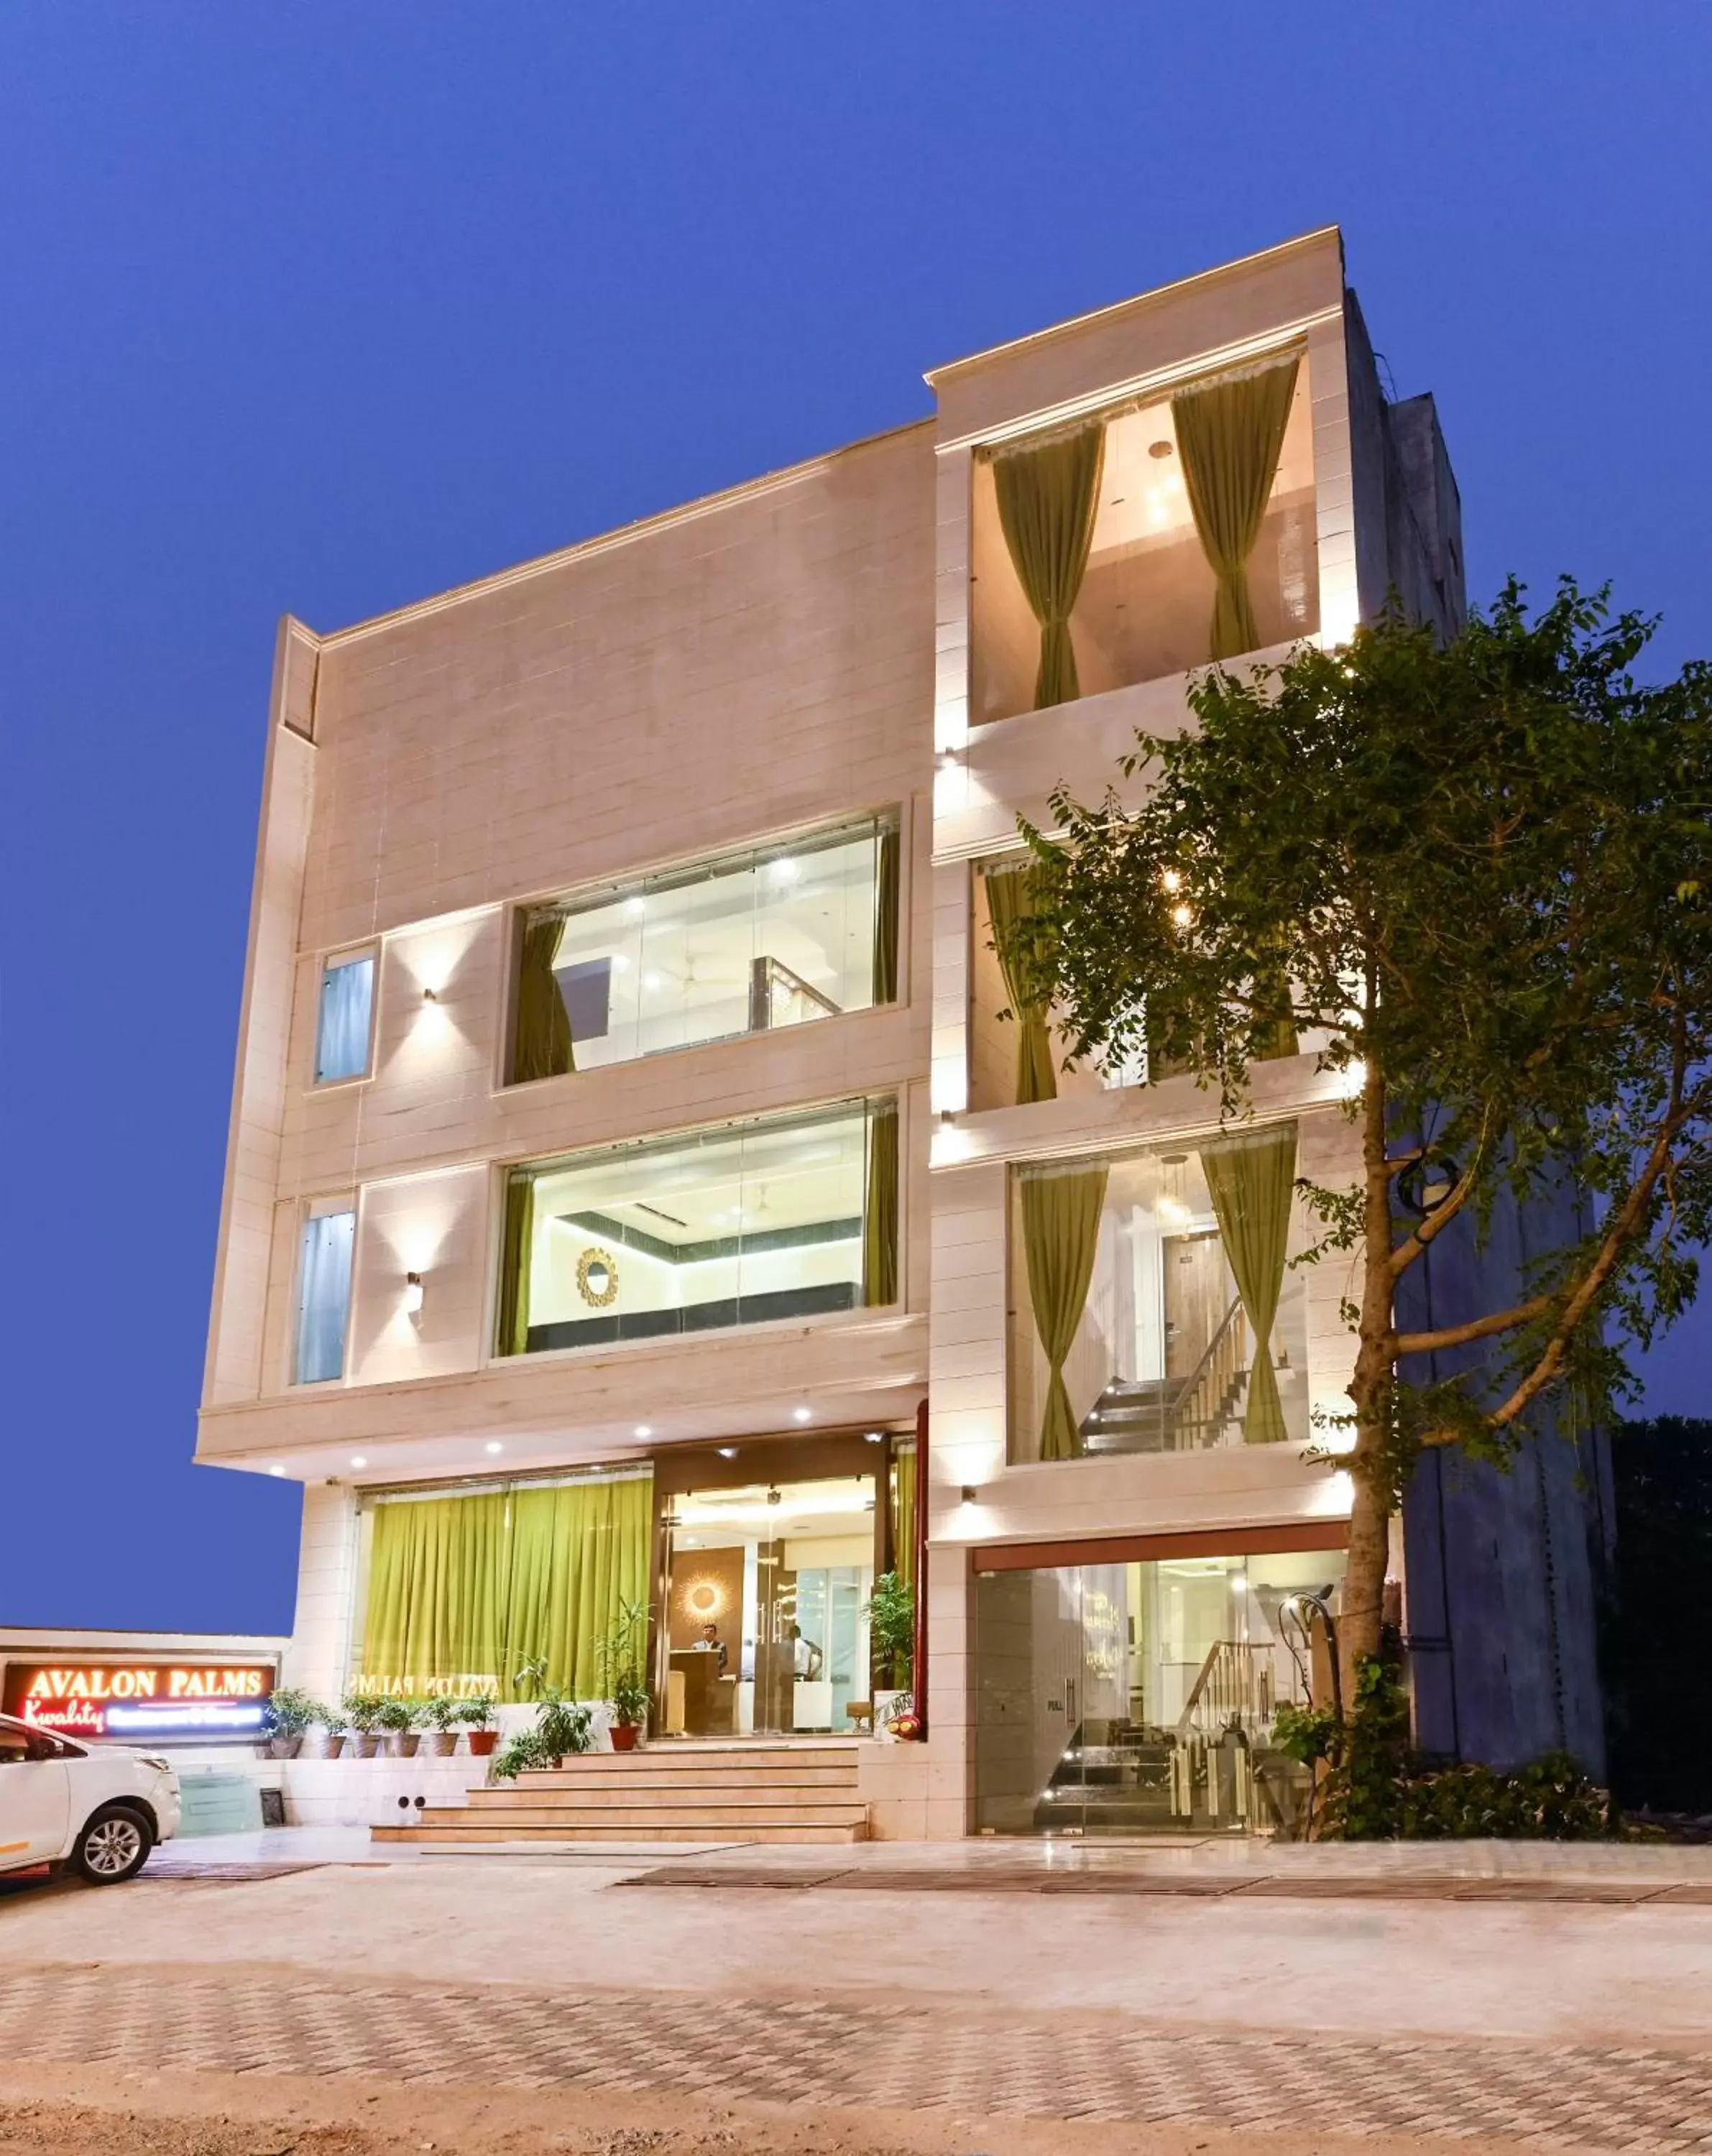 Property Building in Hotel Avalon Palms Agra